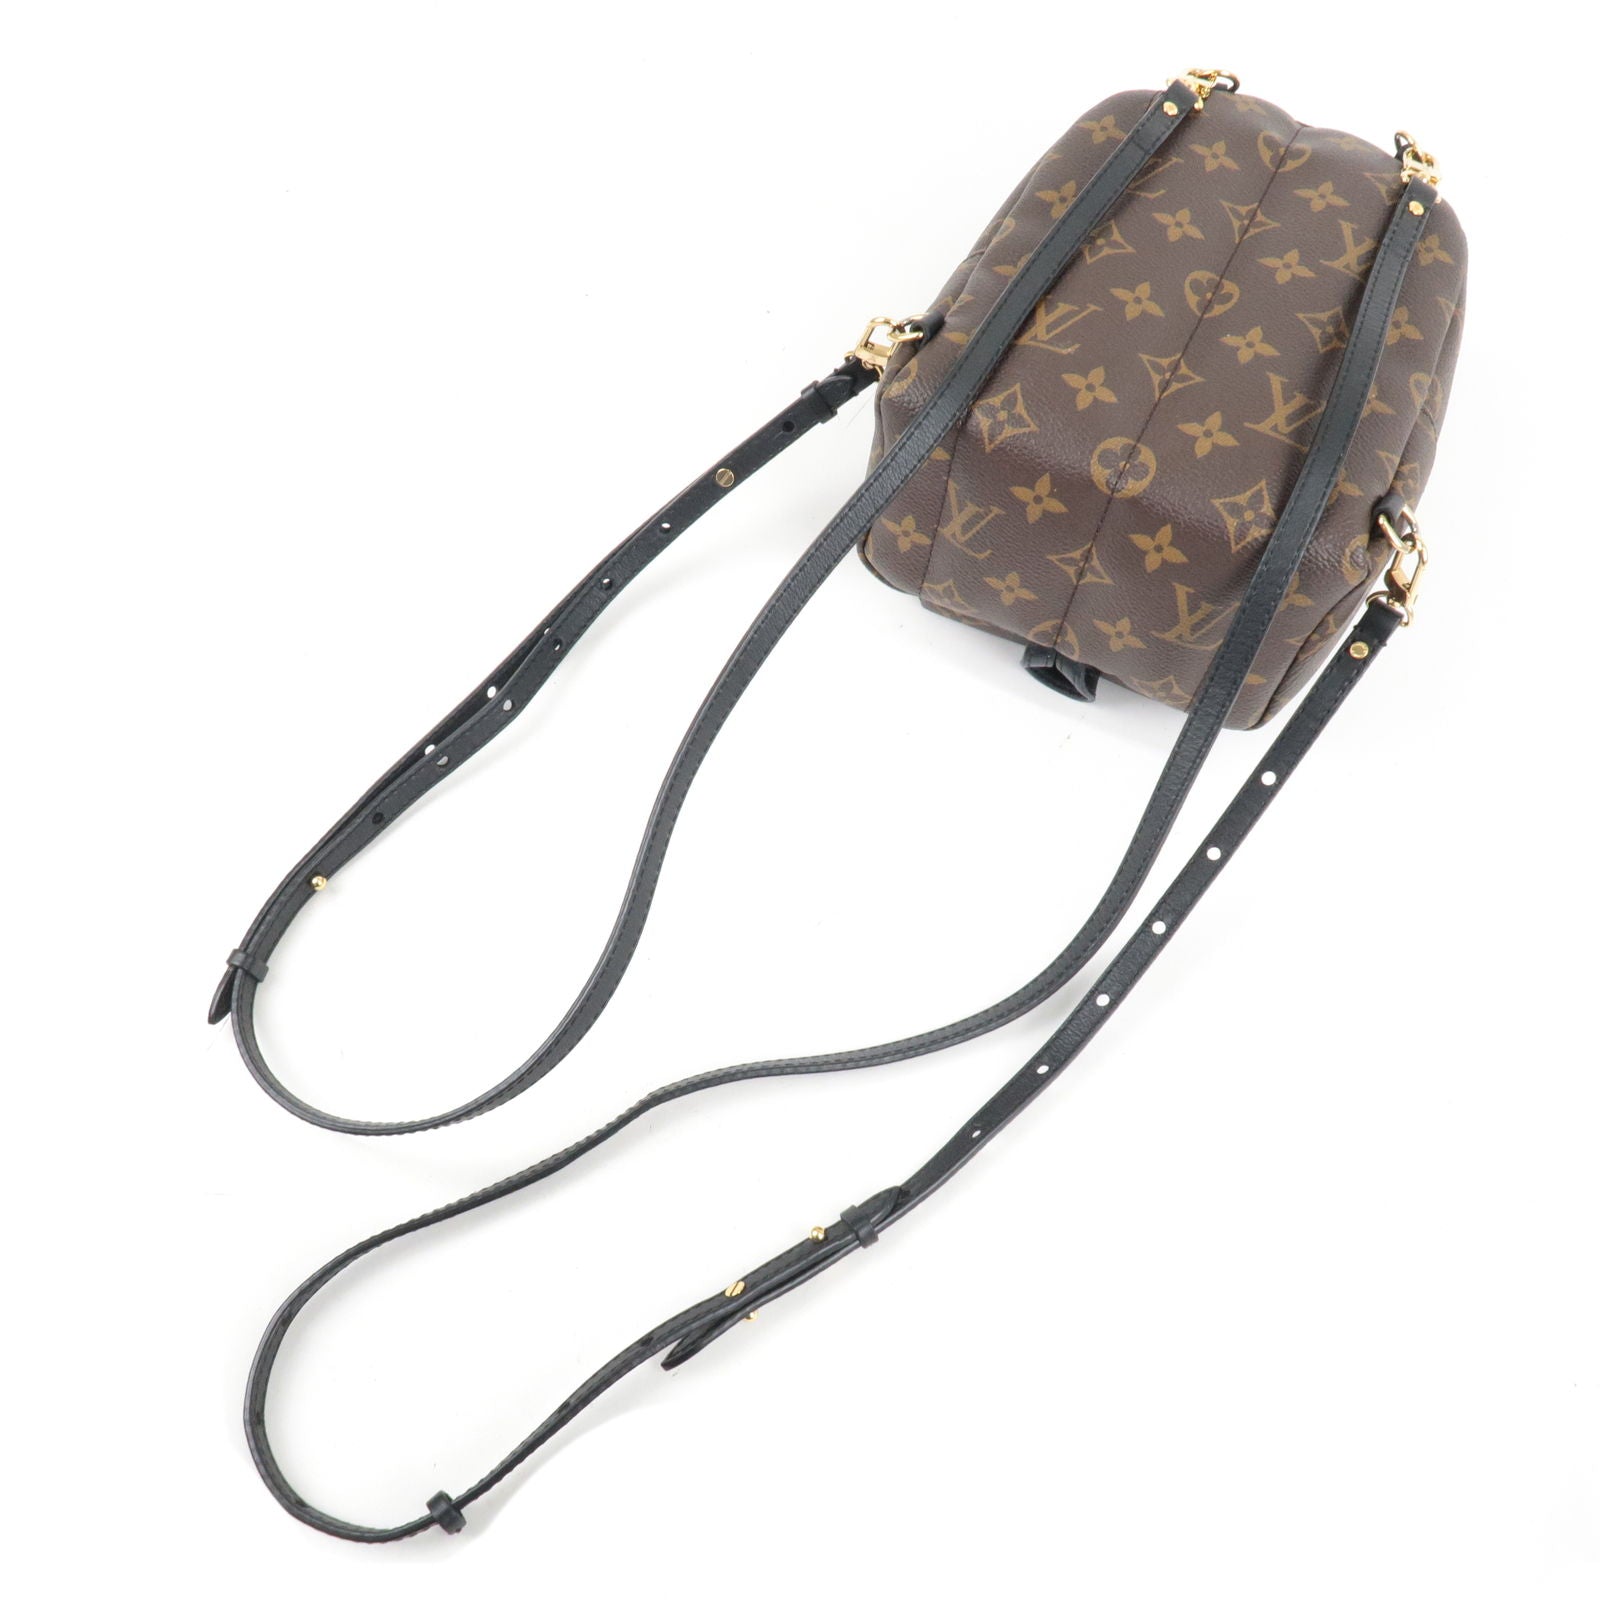 Where can I find a chain and strap similar to the one that comes with the  Pochette Metis EW? : r/Louisvuitton